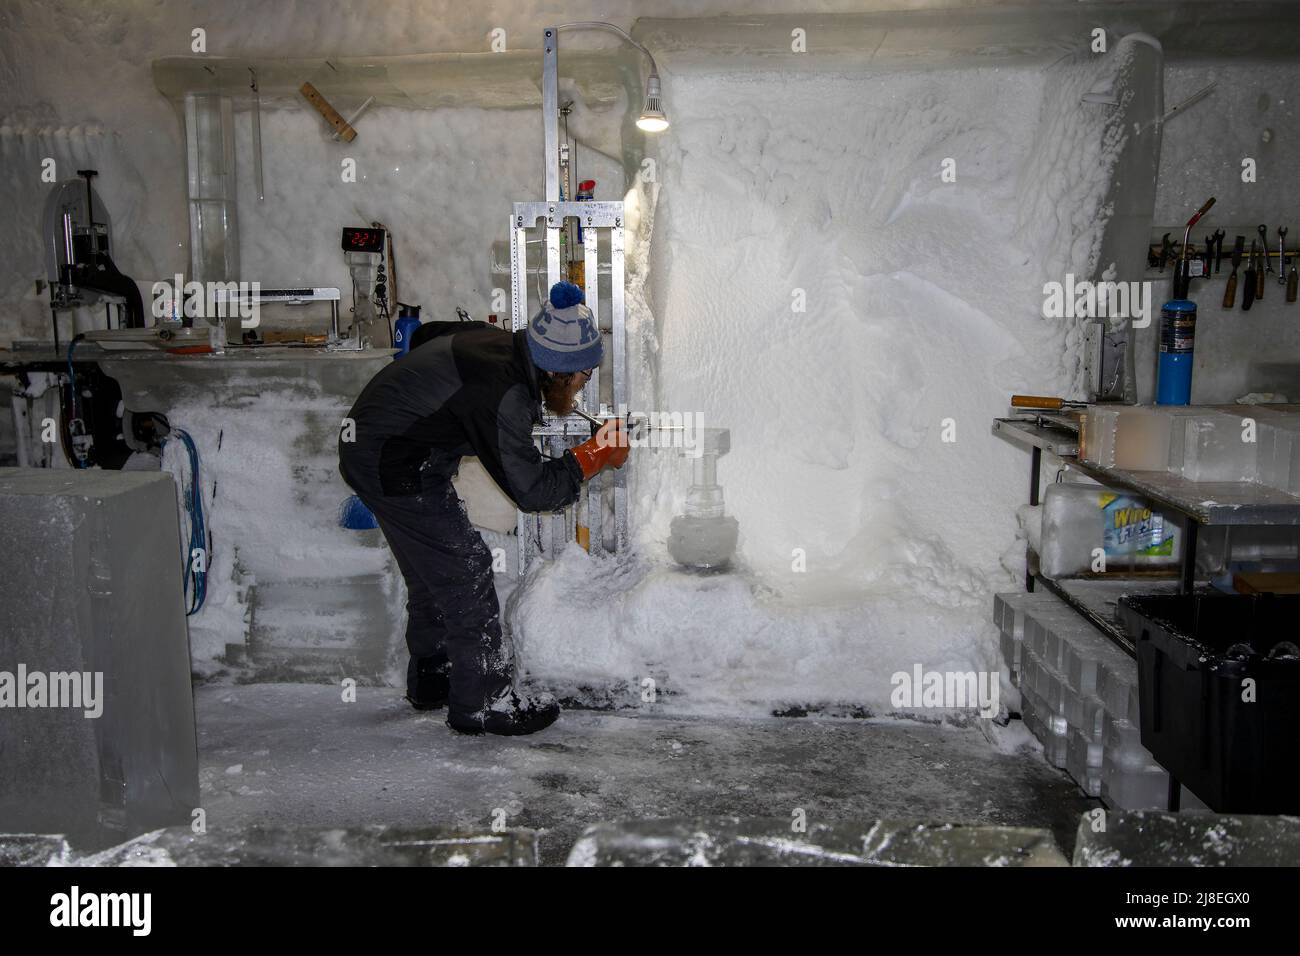 Ice sculpting in the Aurora Ice Museum at Chena Hot Springs Resort outside Fairbanks, AK. Stock Photo